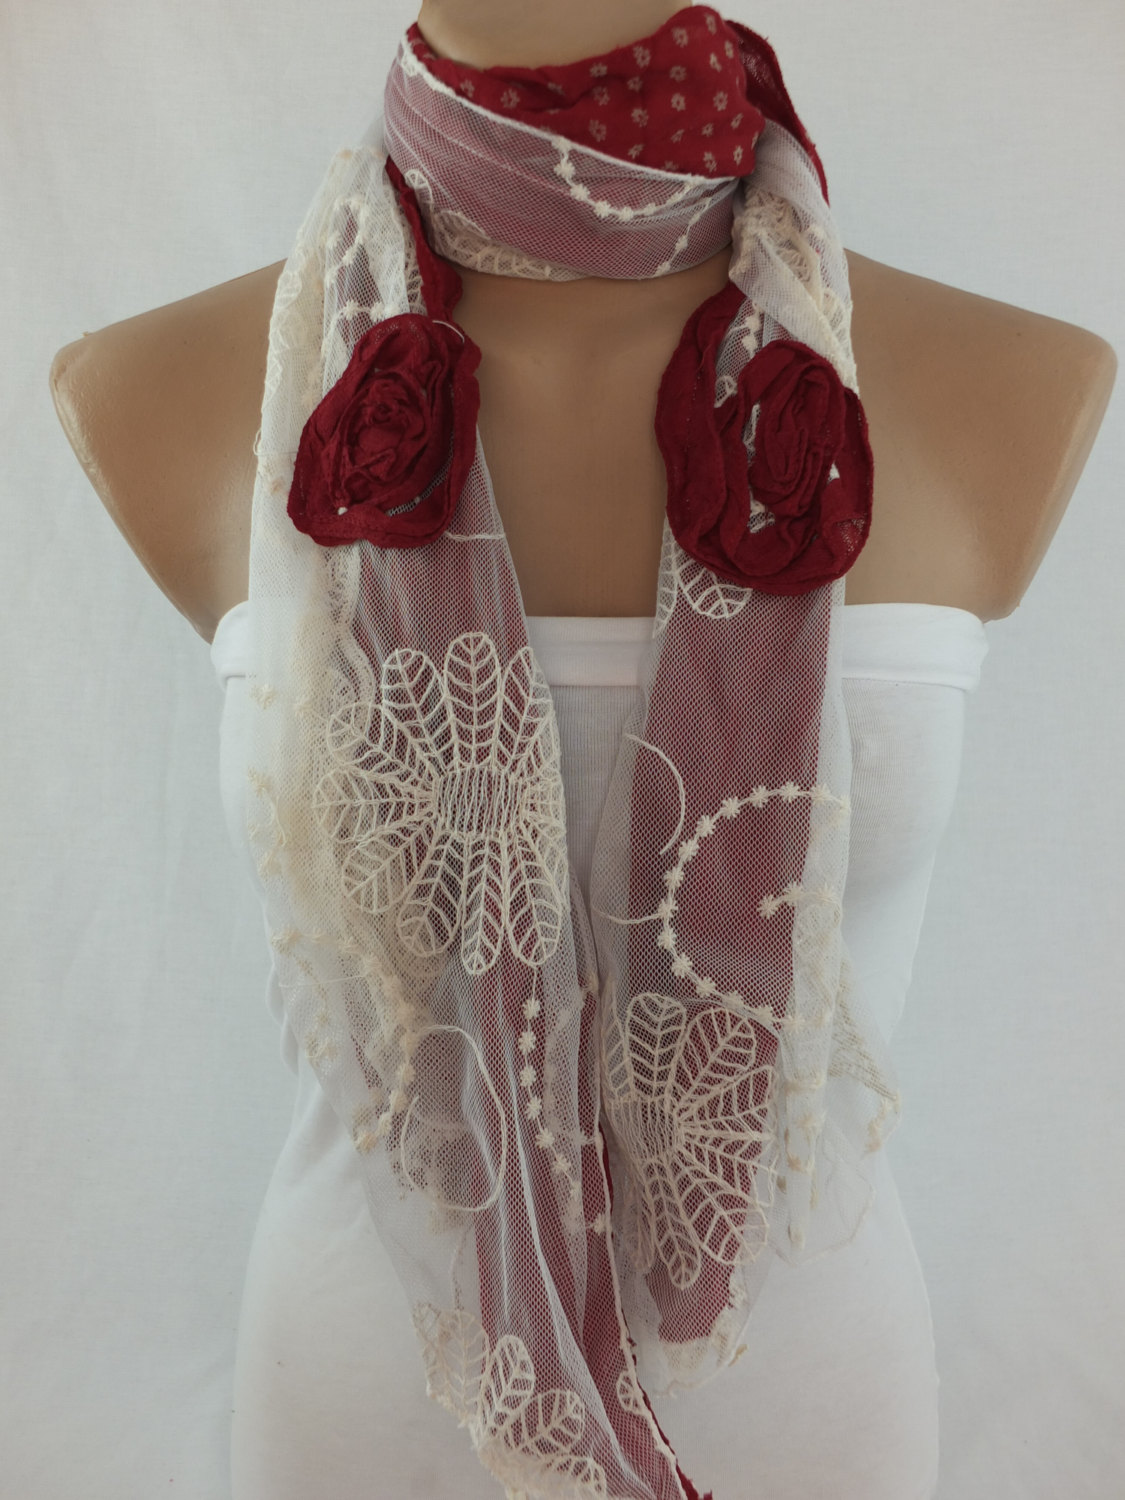 Deep Wine And Cream Scarf/shawl, Tulle And Cotton Scarf, Womans Elegant Scarf, Long Scarf Shawl, Lace Cowl, Gift For Her